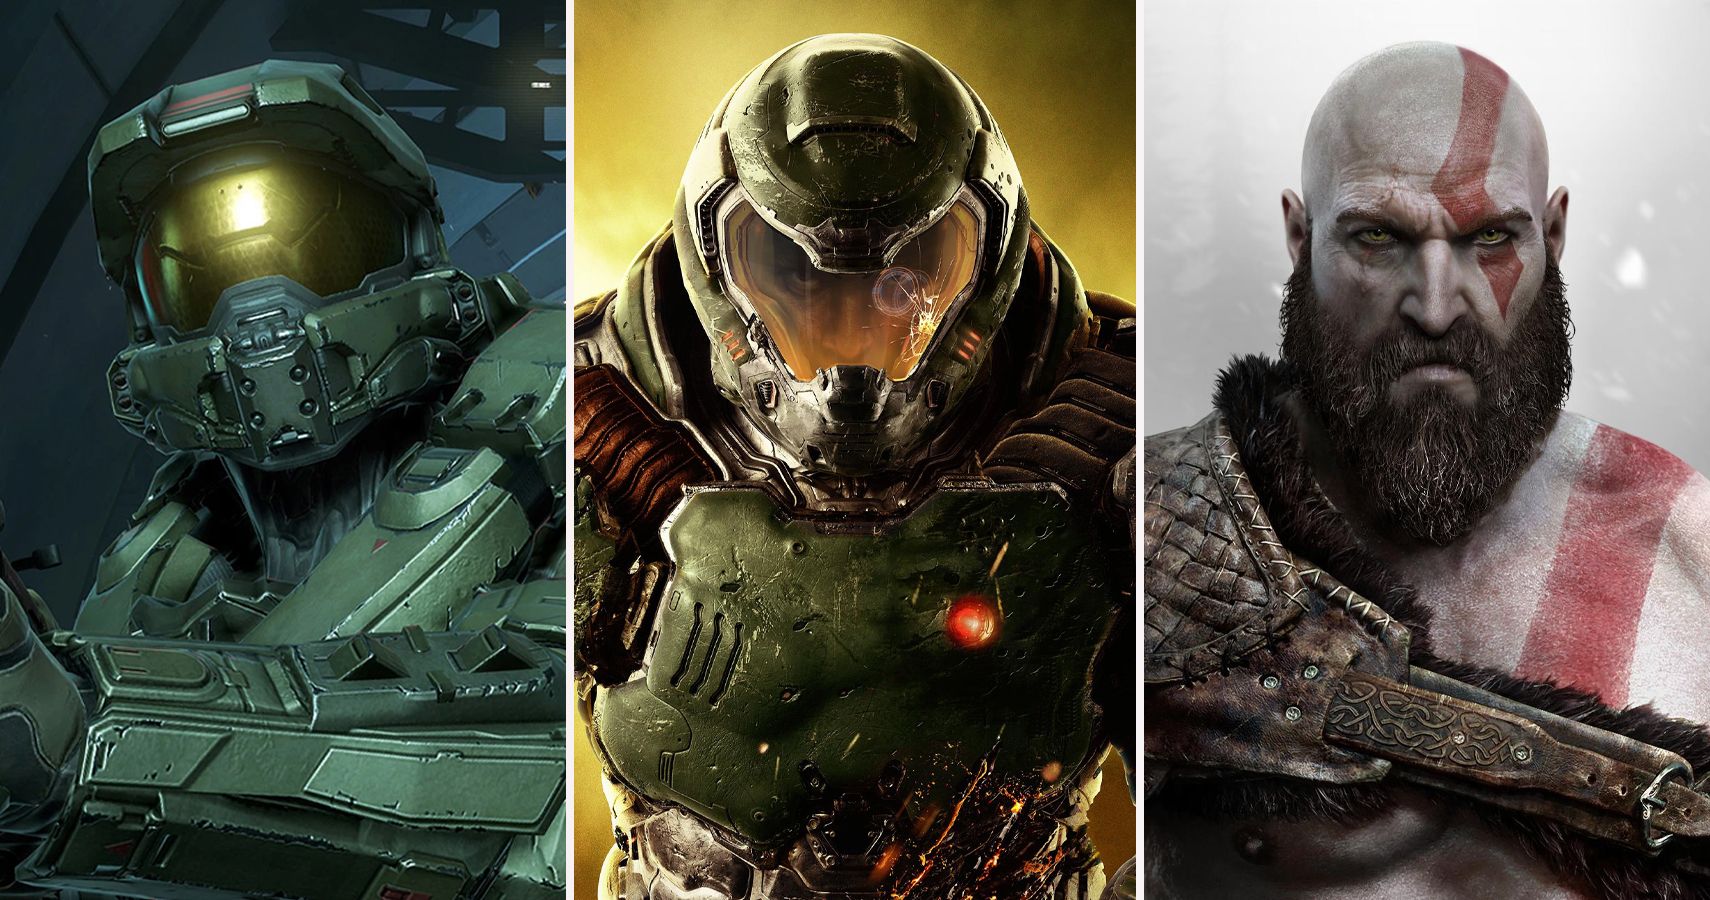 What are 3 ways Doom Slayer can kill Master Chief? - Quora